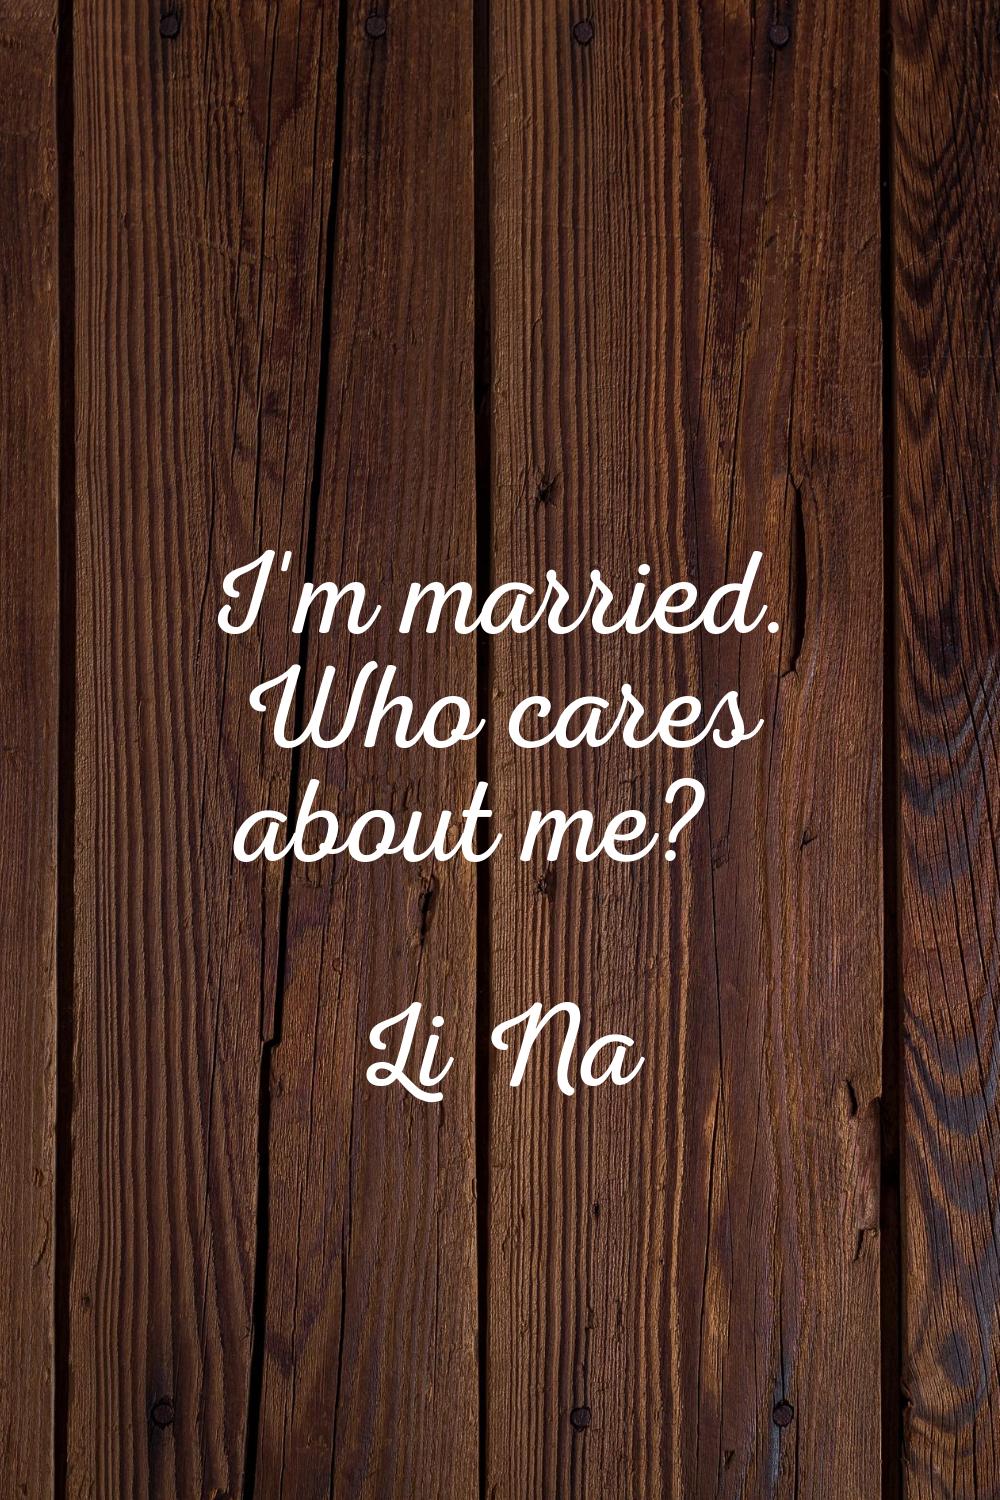 I'm married. Who cares about me?